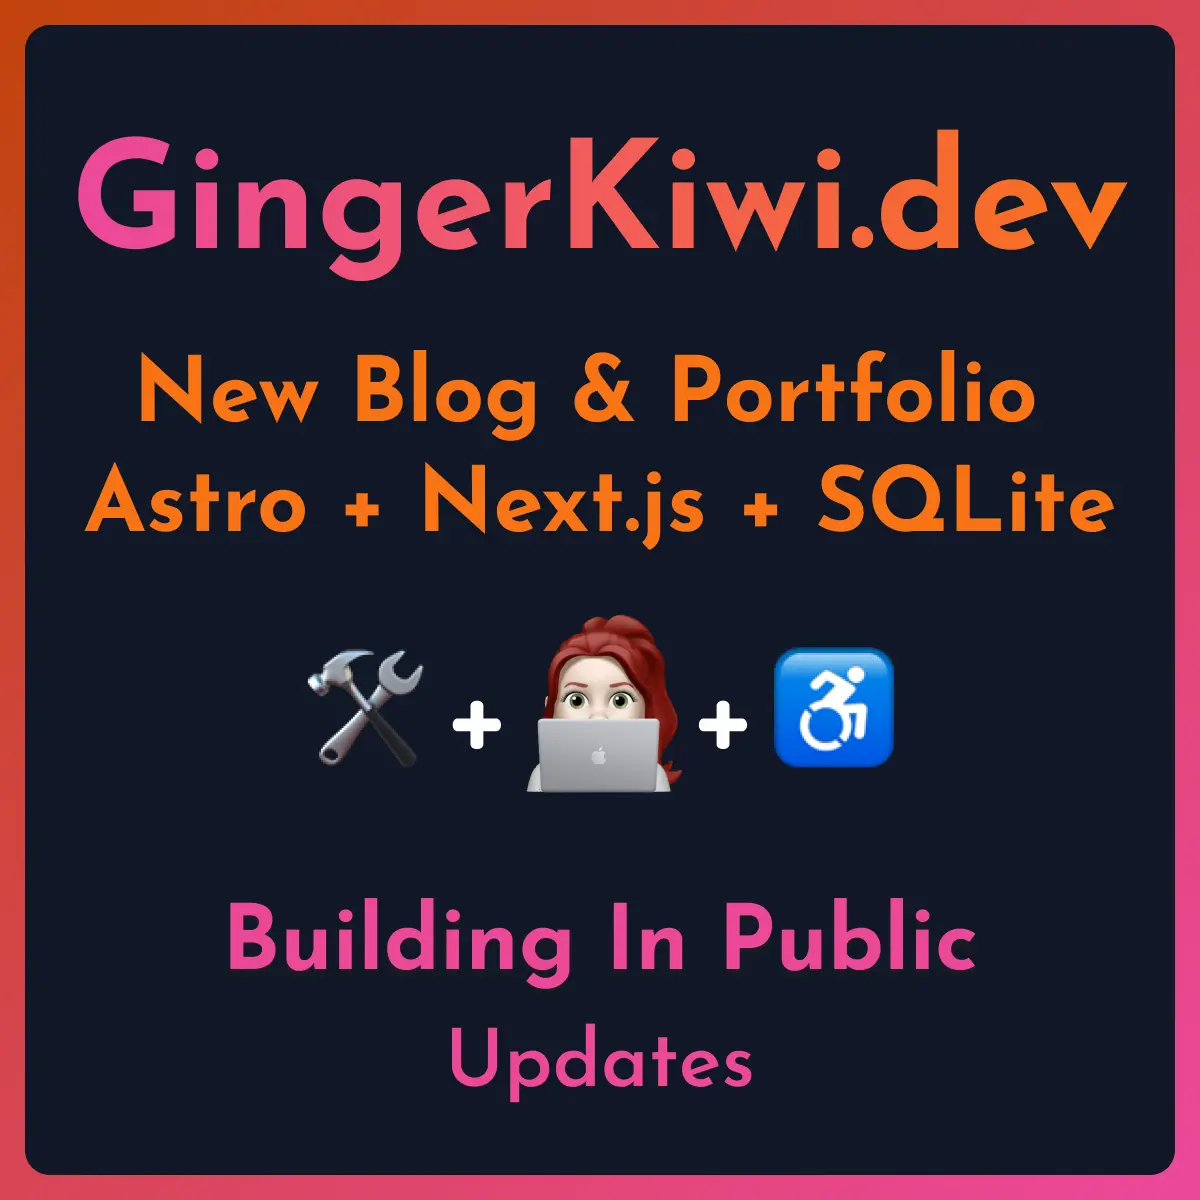 'Graphic. Dark blue background. Gradient orange to pink border. Gradient text at top says GingerKiwi.dev. Underneath orange text says New Blog & Portfolio Astro + Next.js + SQLite then there's a row of three emojis separated by two + signs. crossed hammer and wrench, a redheaded woman behind a silver laptop, and a blue wheelchair symbol. Underneath in pink text it says Building in Public Updates'